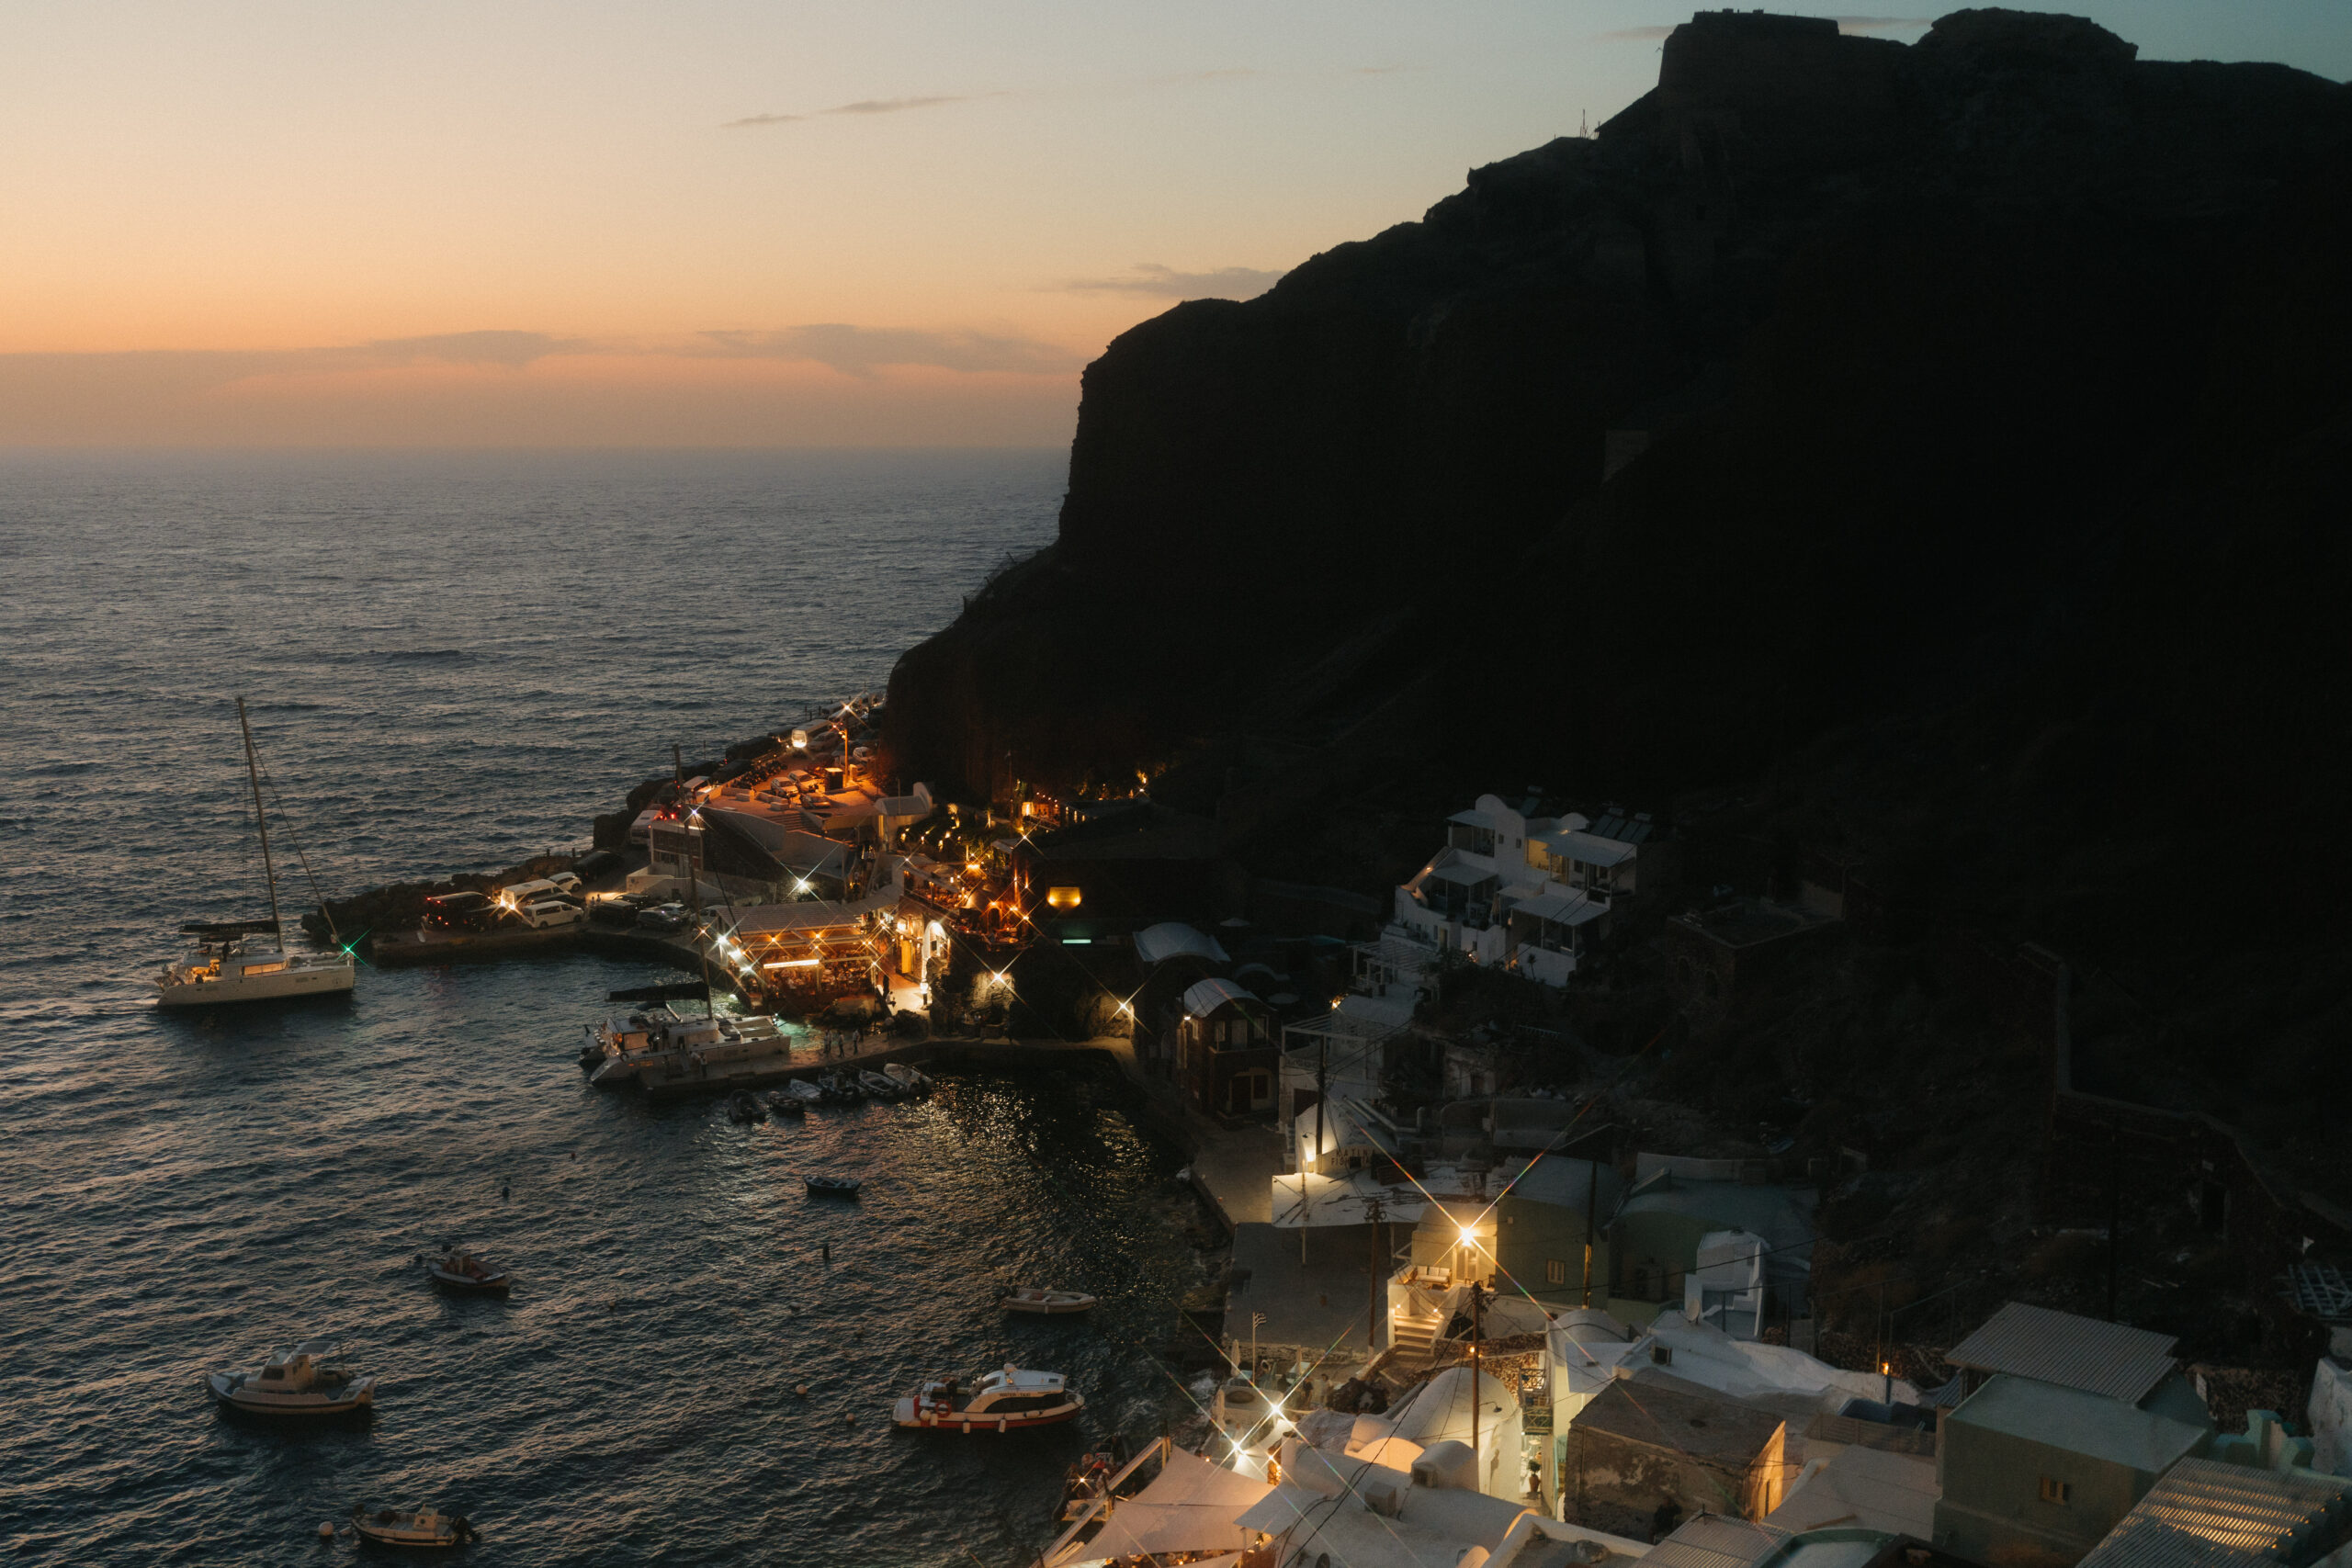 Santorini Greece at dusk, with boats floating near the shore and a sunset over the horizon.